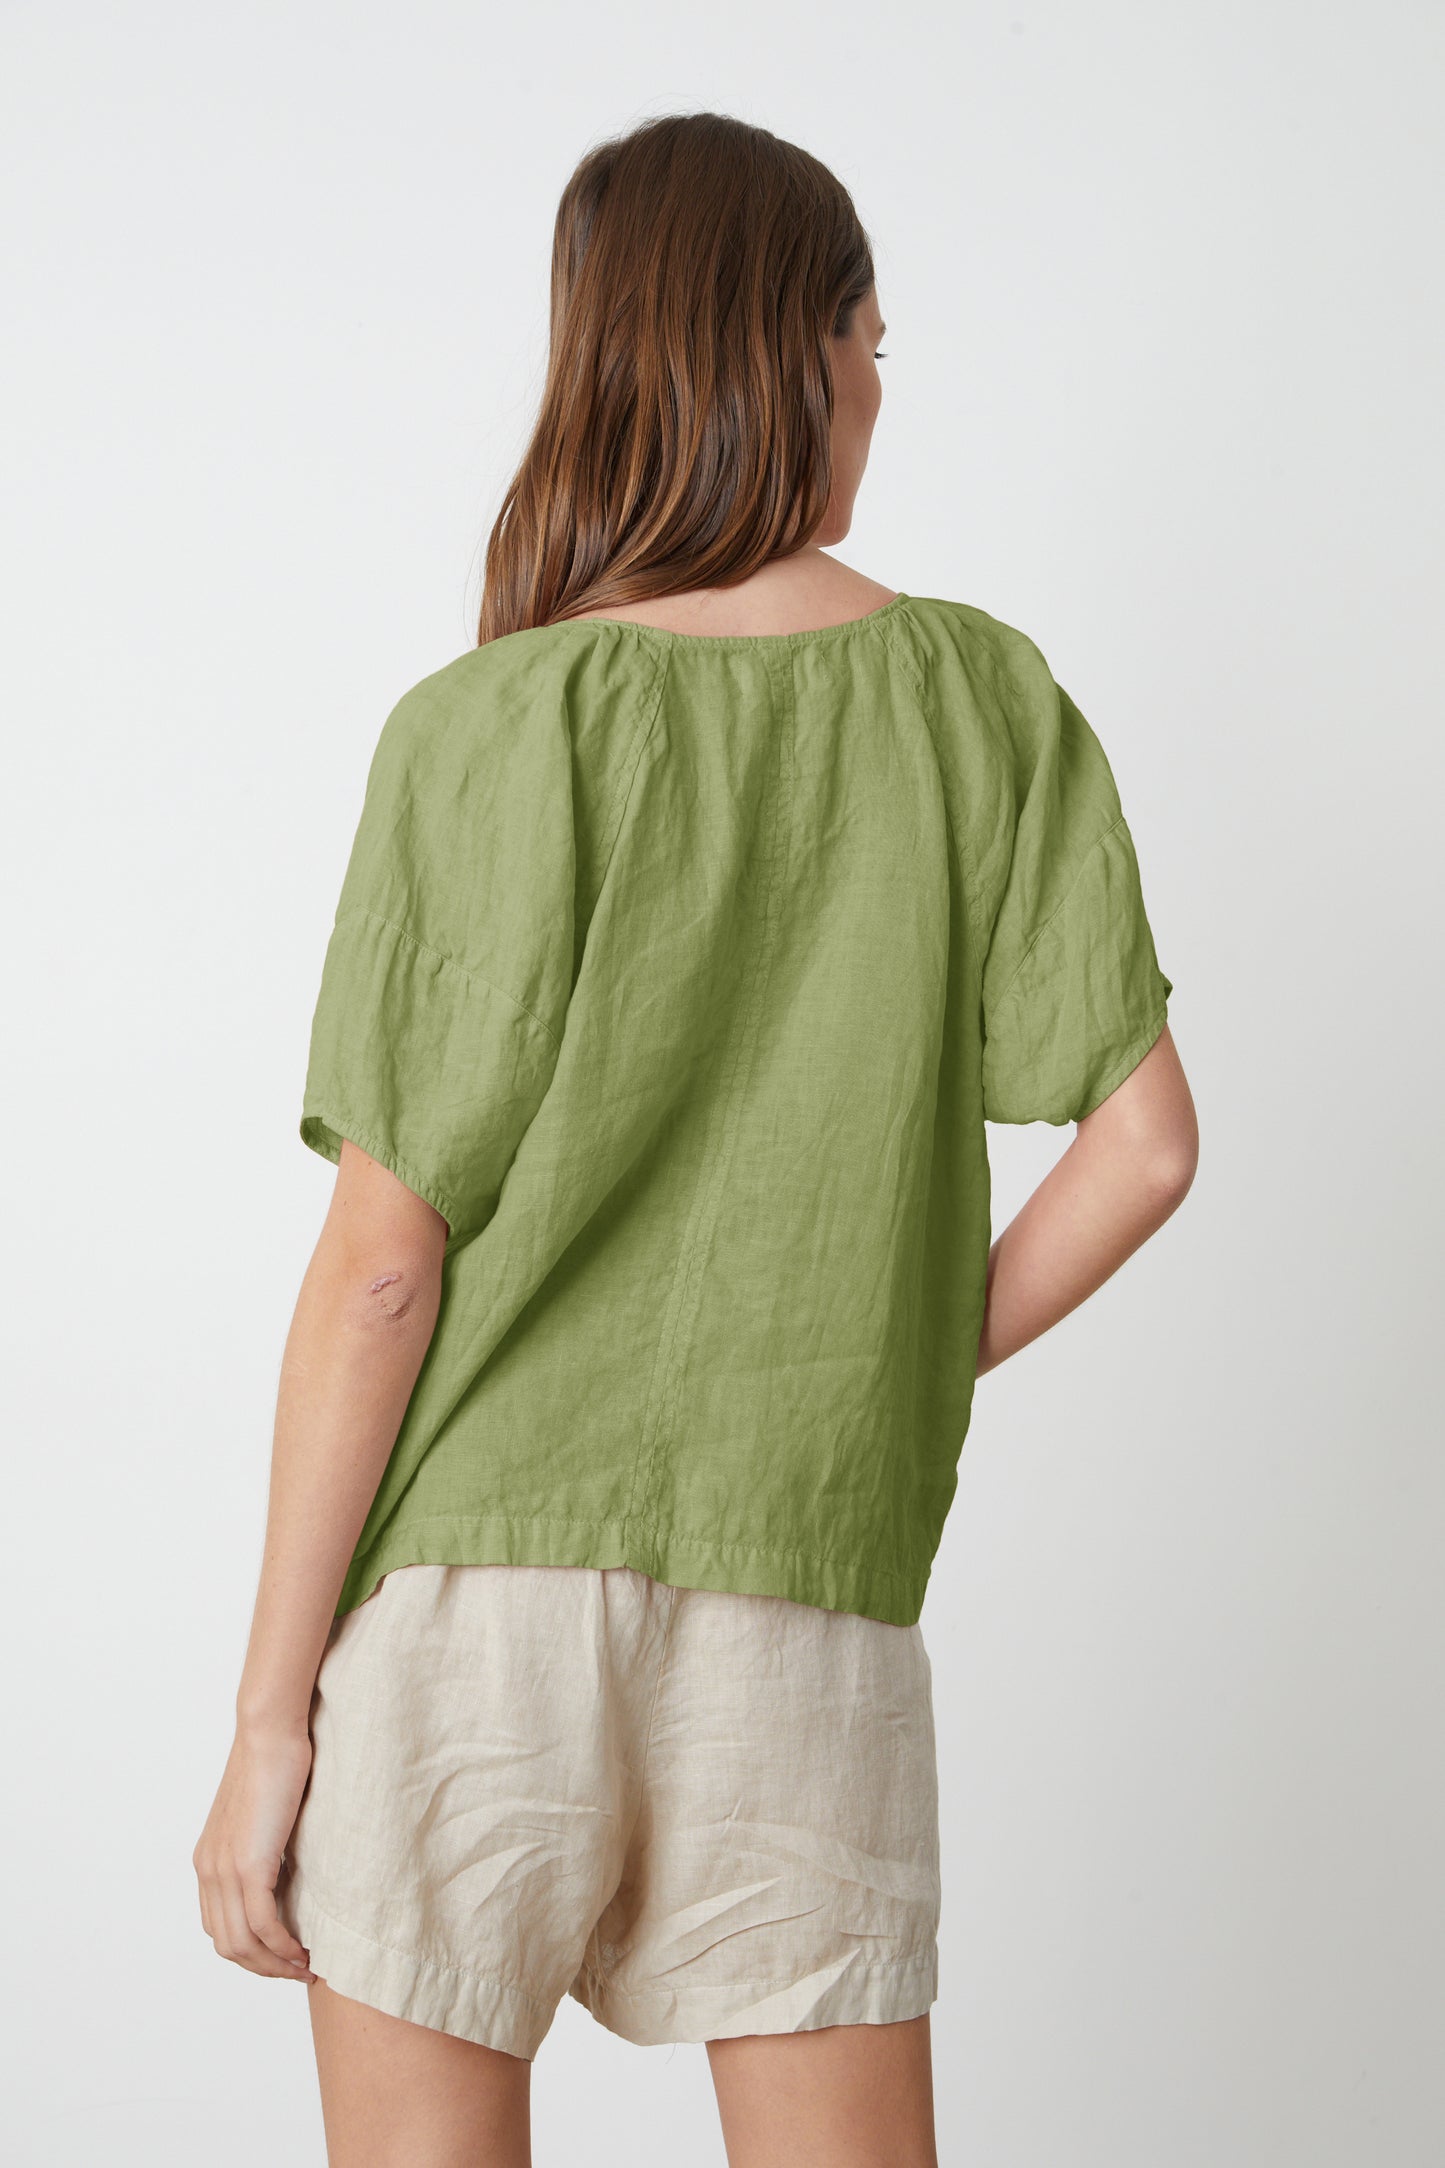 The back view of a woman wearing a Velvet by Graham & Spencer CALLIN PUFF SLEEVE LINEN TOP and Tammy shorts.-26577402298561